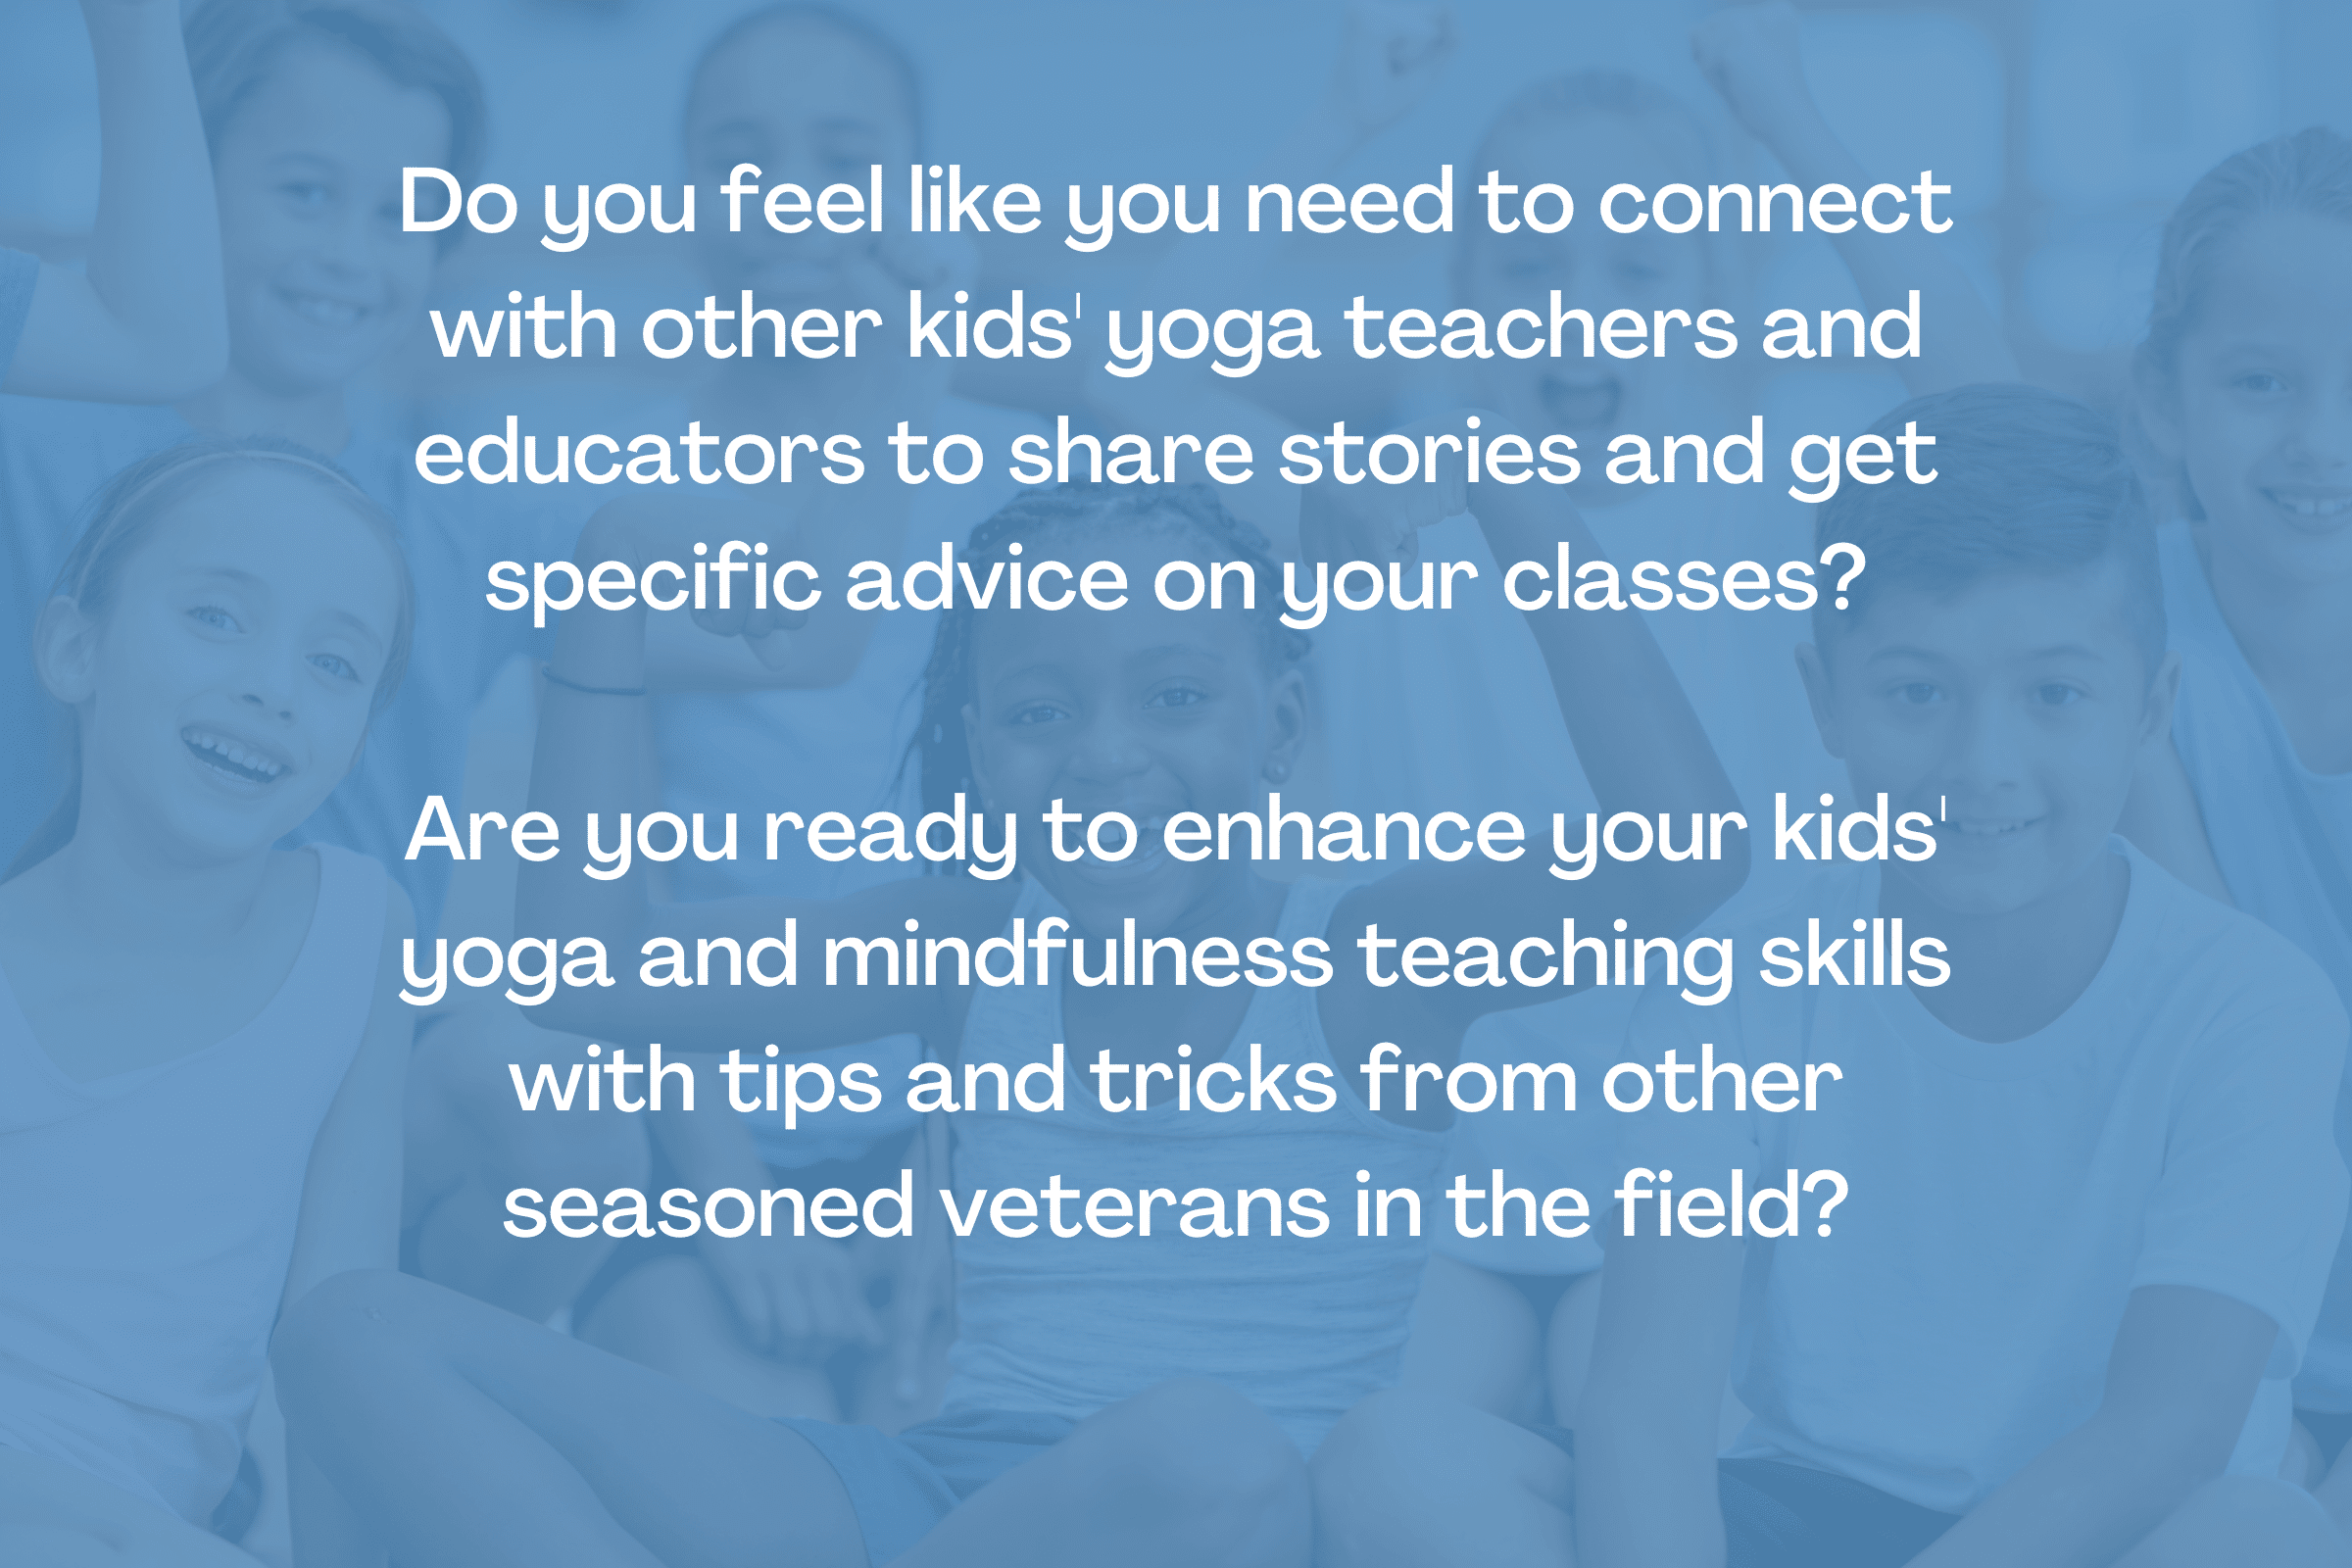 Do you feel like you need to connect with other kids' yoga teachers and educators to share stories and get specific advice on your classes?

Are you ready to enhance your kids' yoga and mindfulness teaching skills with tips and tricks from other seasoned veterans in the field?

Kids' yoga learning community - empowered educators